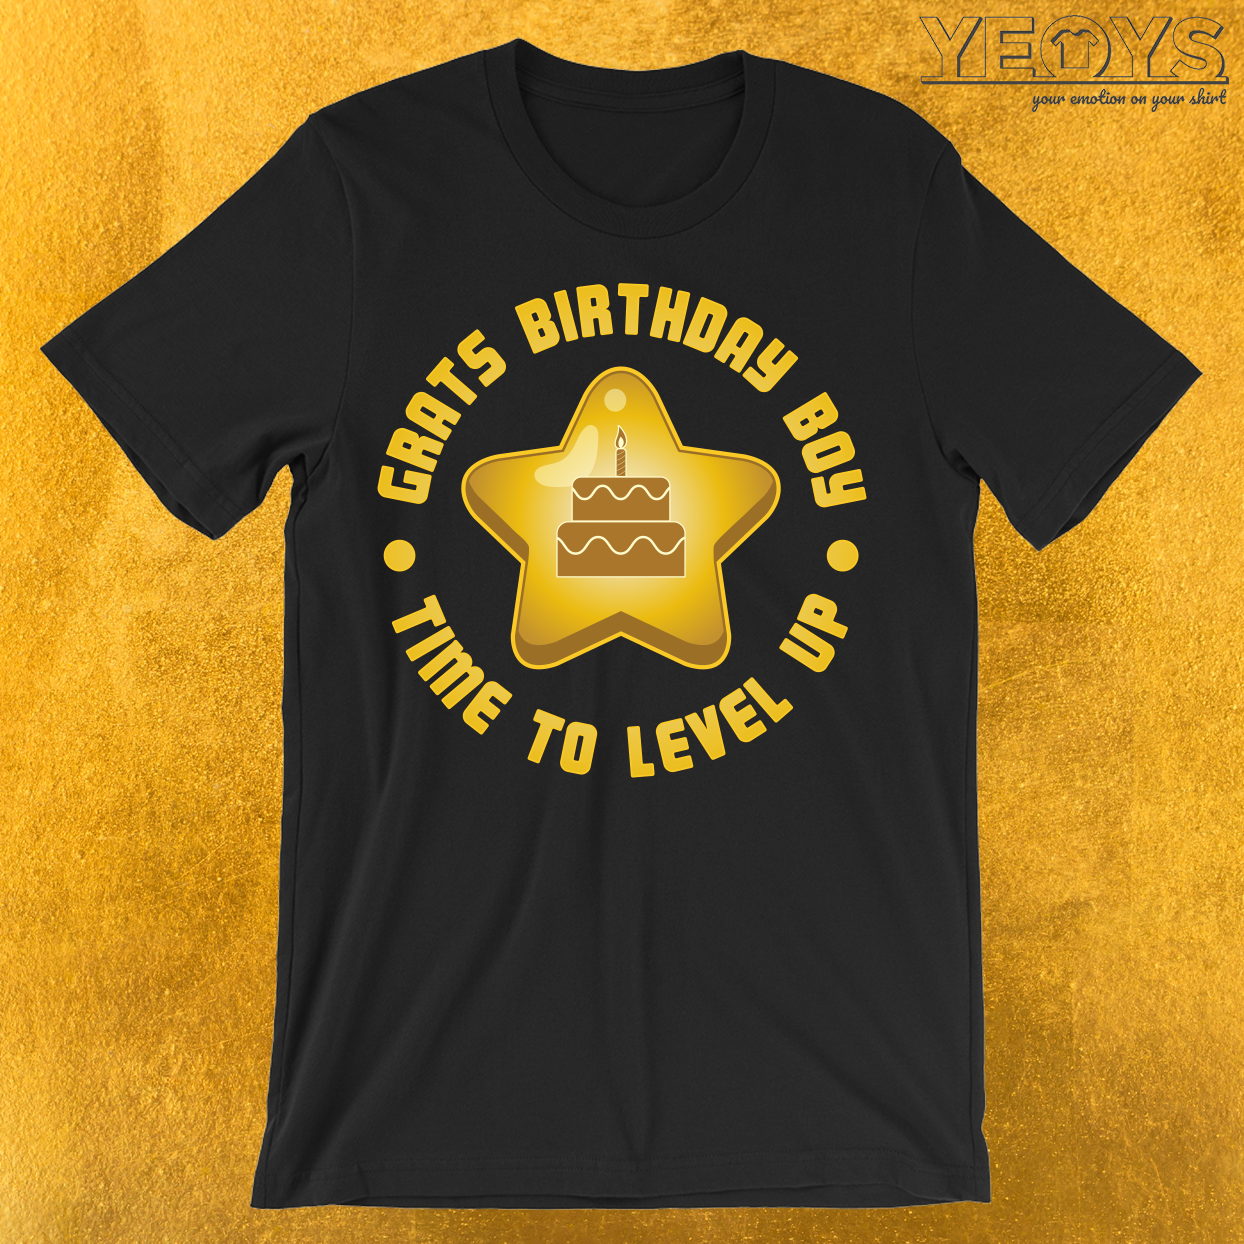 Grats Birthday Boy Time To Level Up T-Shirt